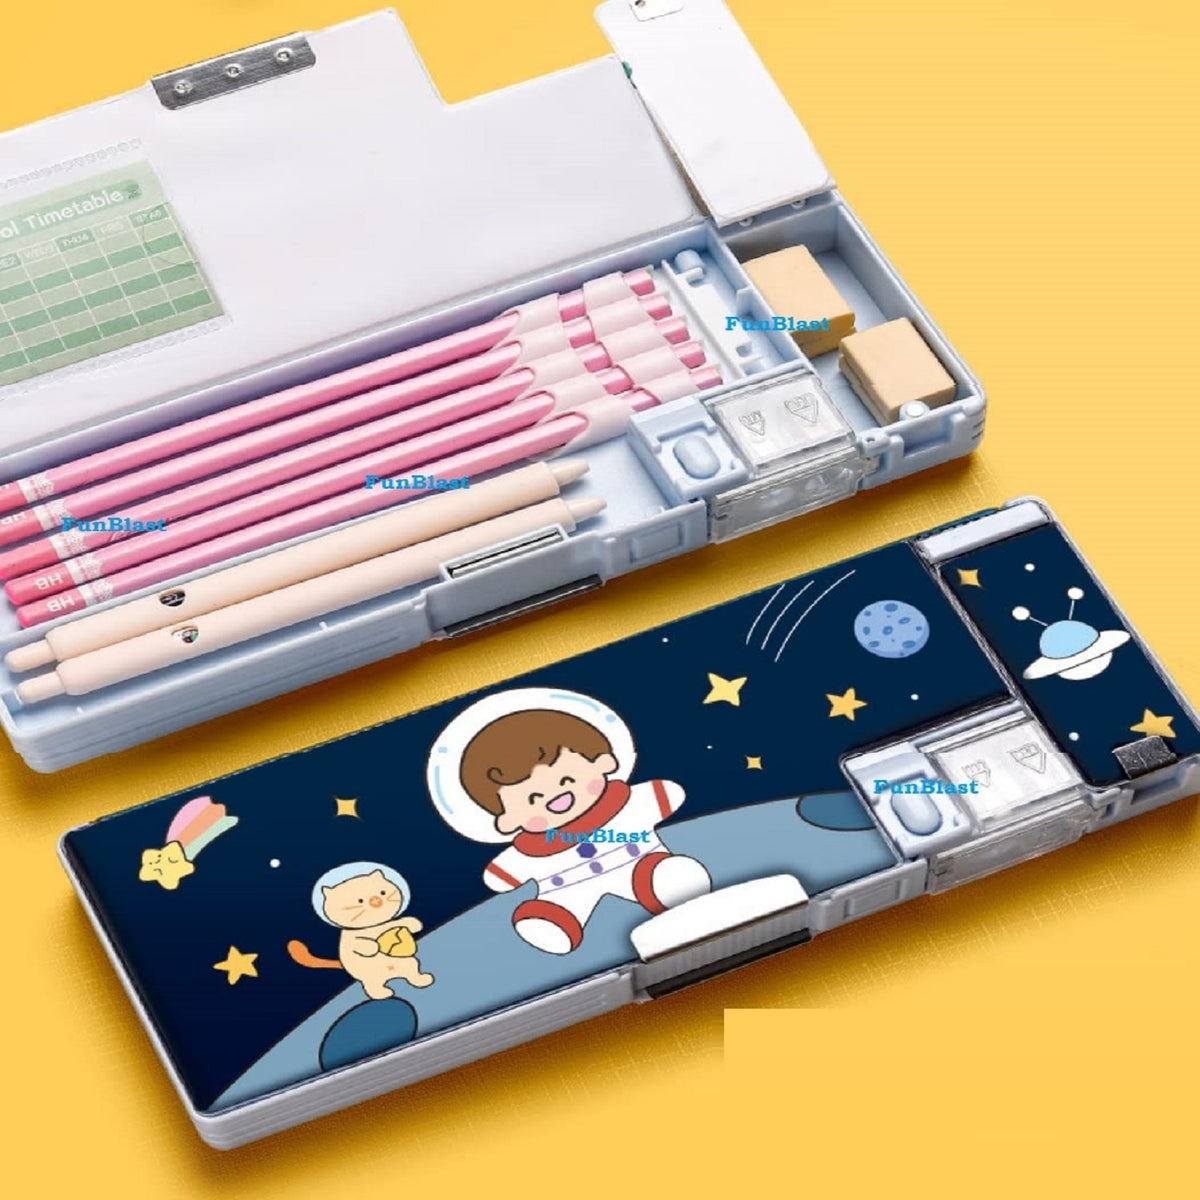 Multifunctional Pencil Box for Kids, Space Pencil Box for Boys, Magnetic  Pencil Box for Boys, Pop up Pencil Box